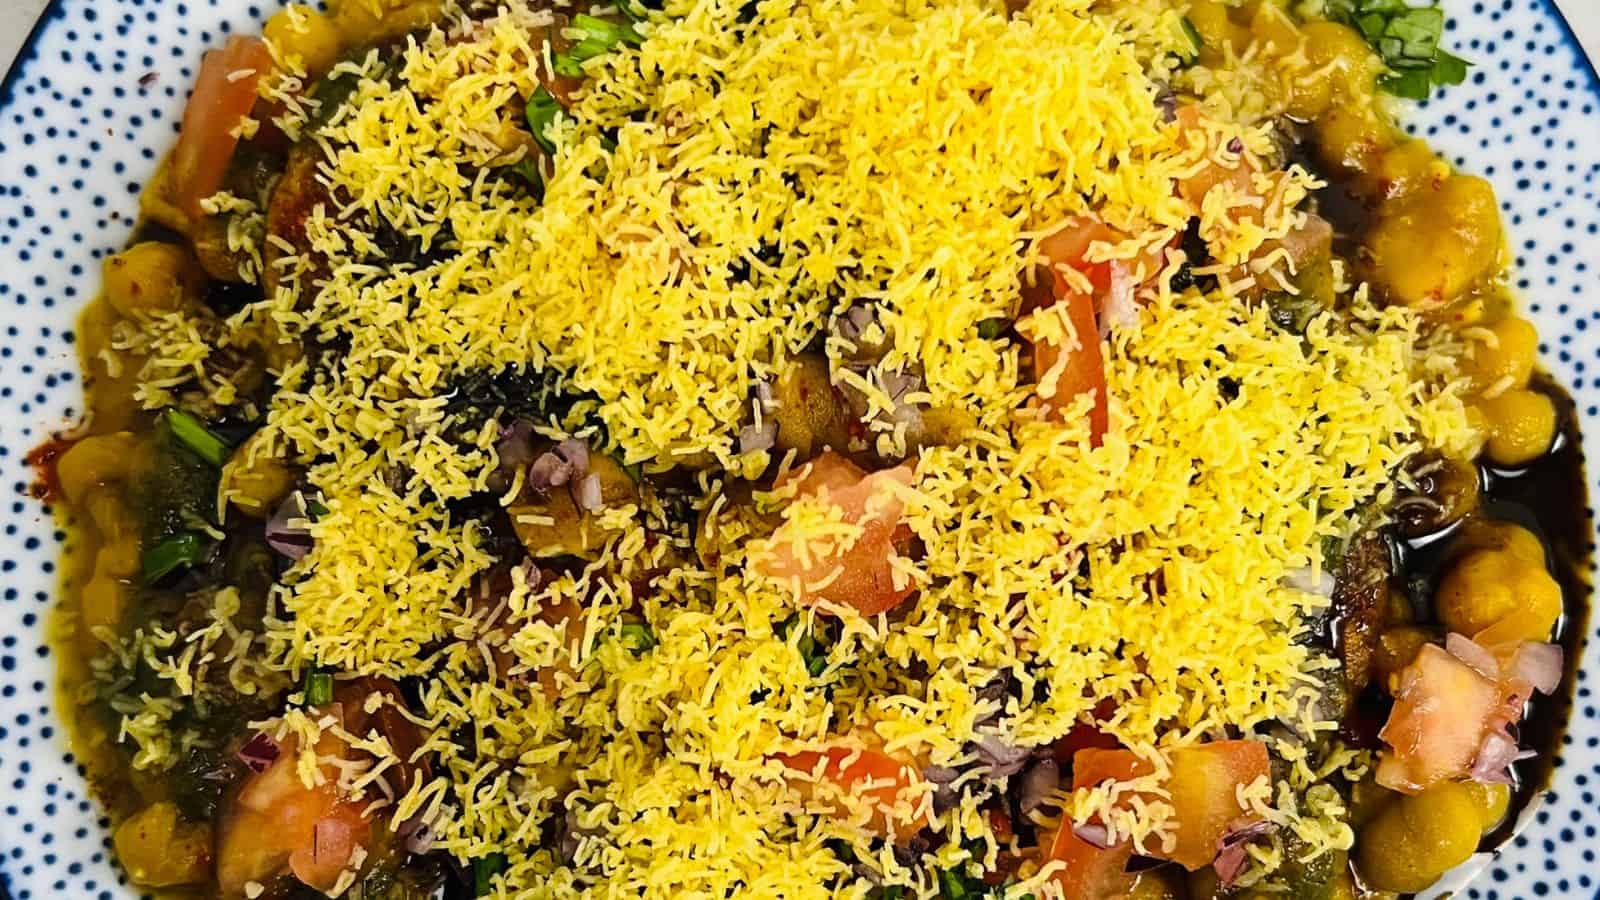 A close-up of a dish consisting of assorted vegetables and pulses, topped with a generous layer of yellow sev (crispy noodles).